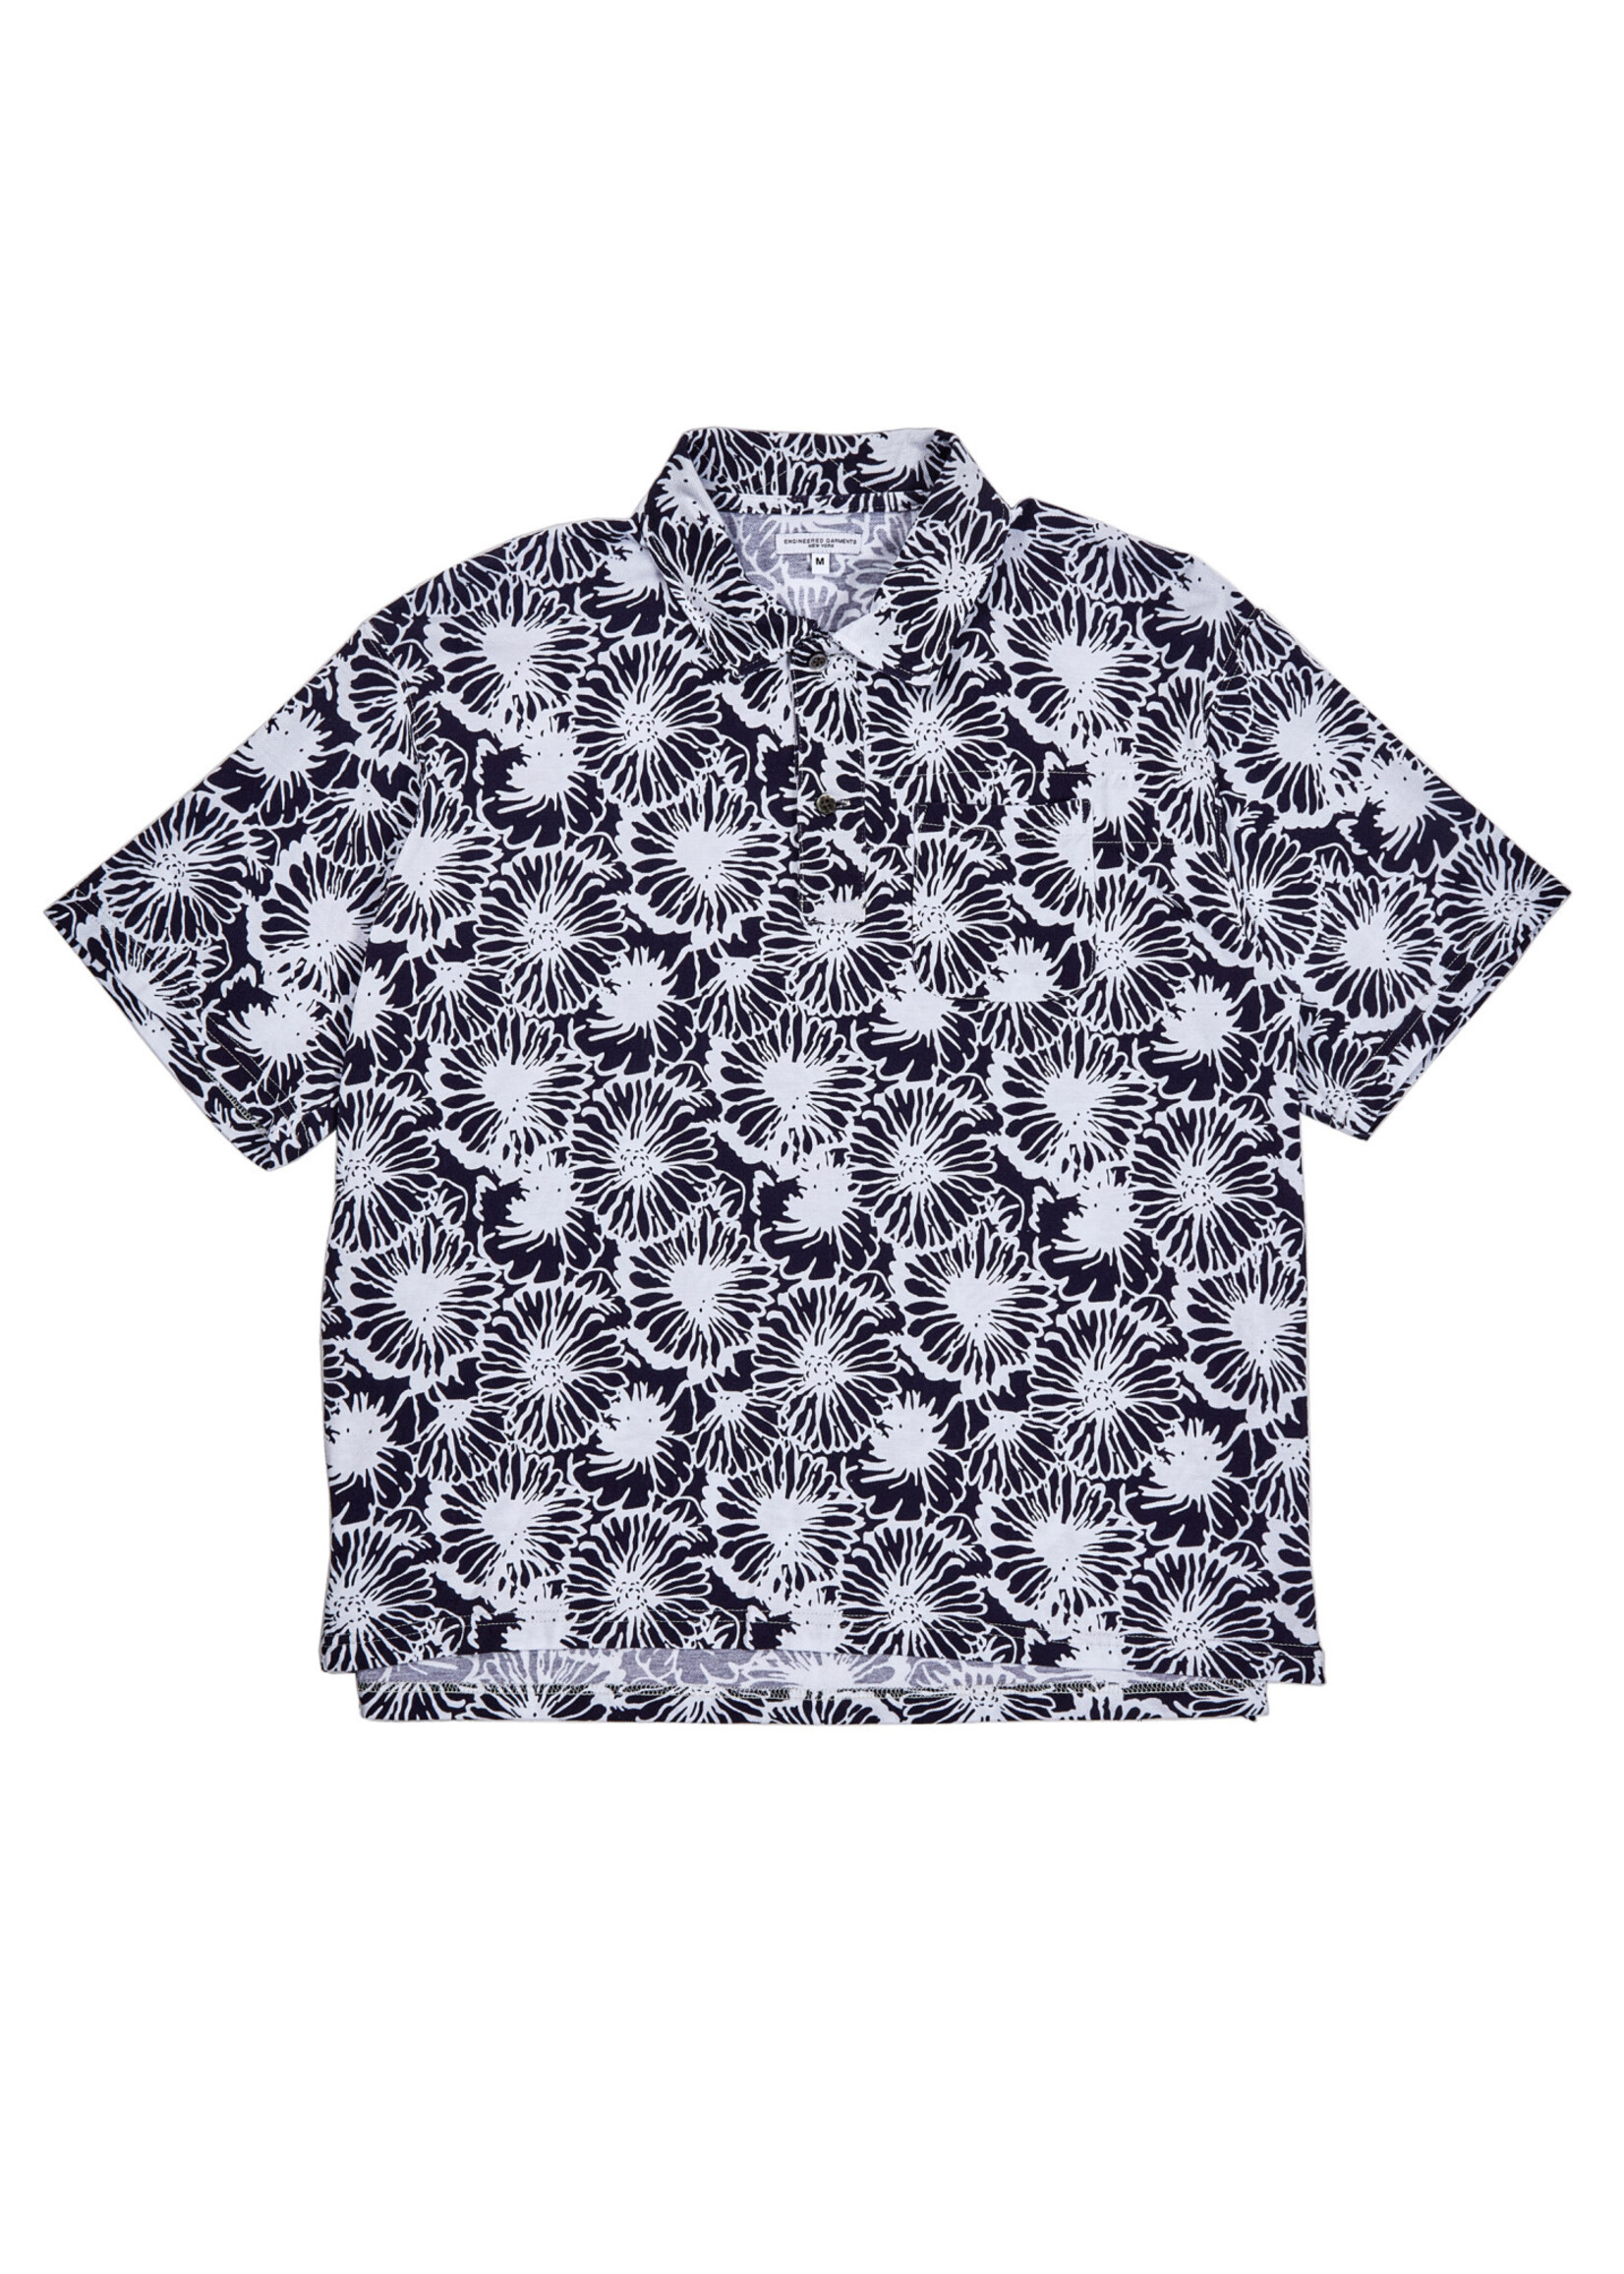 Engineered Garments Engineered Garments Polo Shirt Navy Cotton Floral Pique